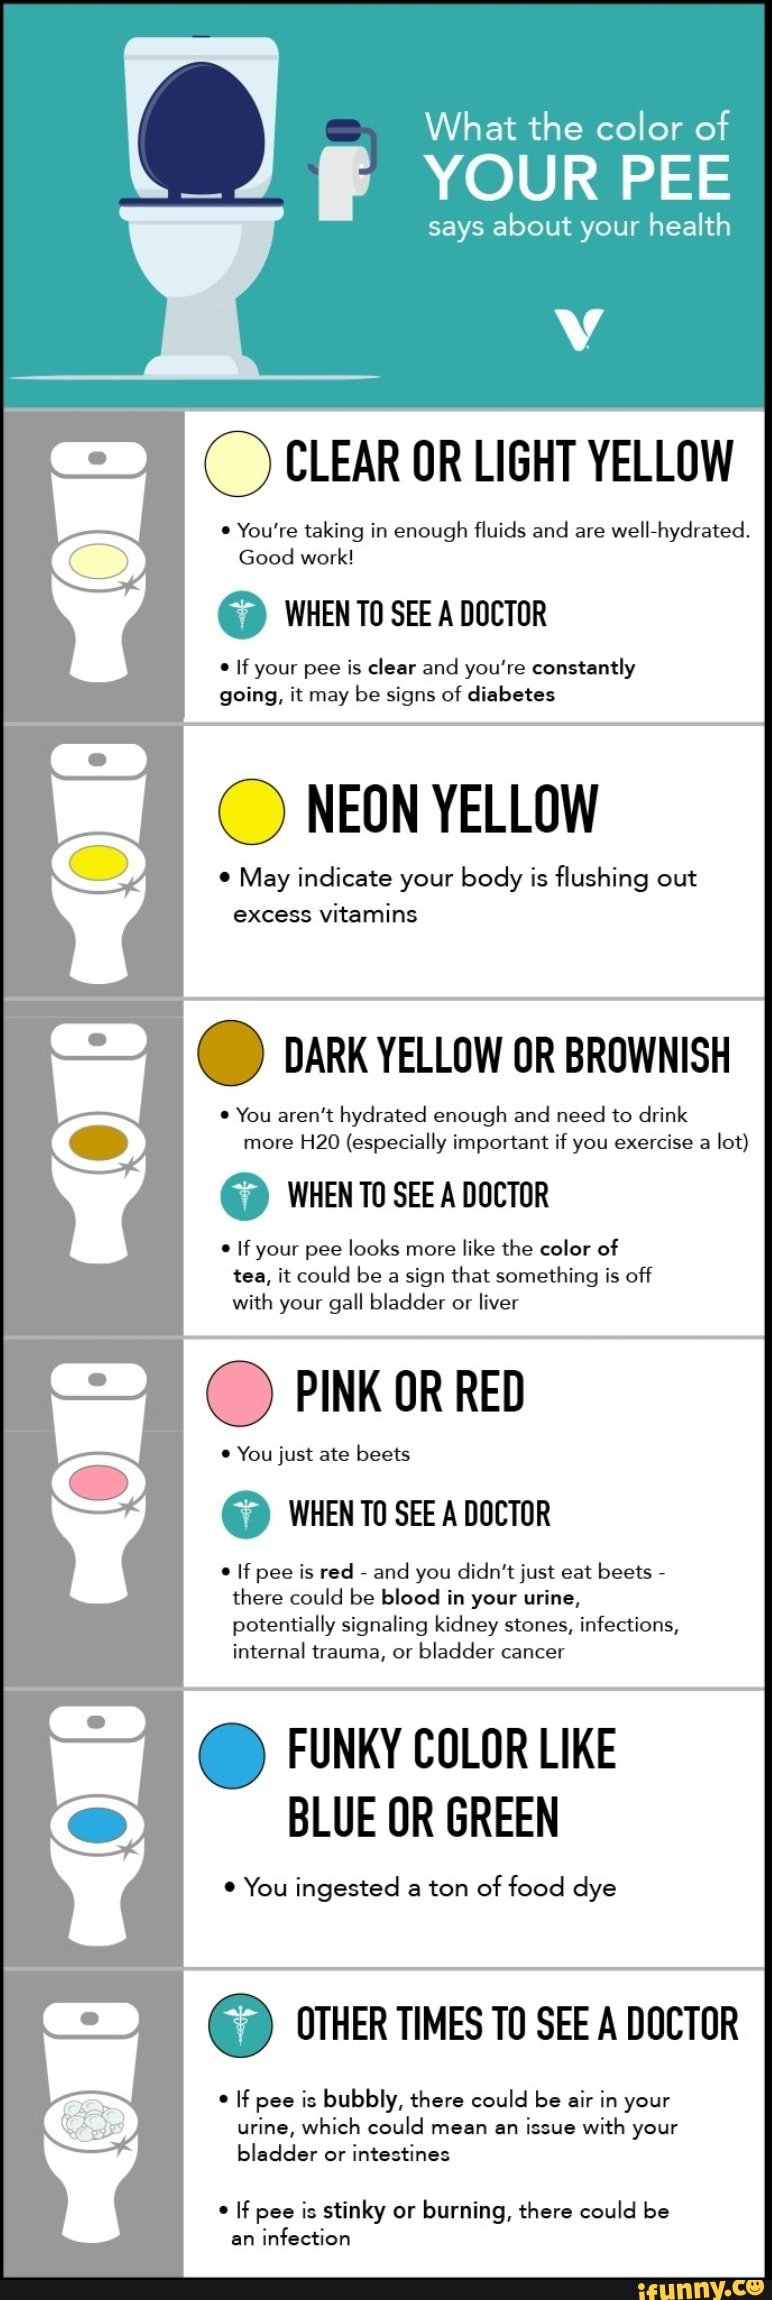 What Color Should My Pee Be?